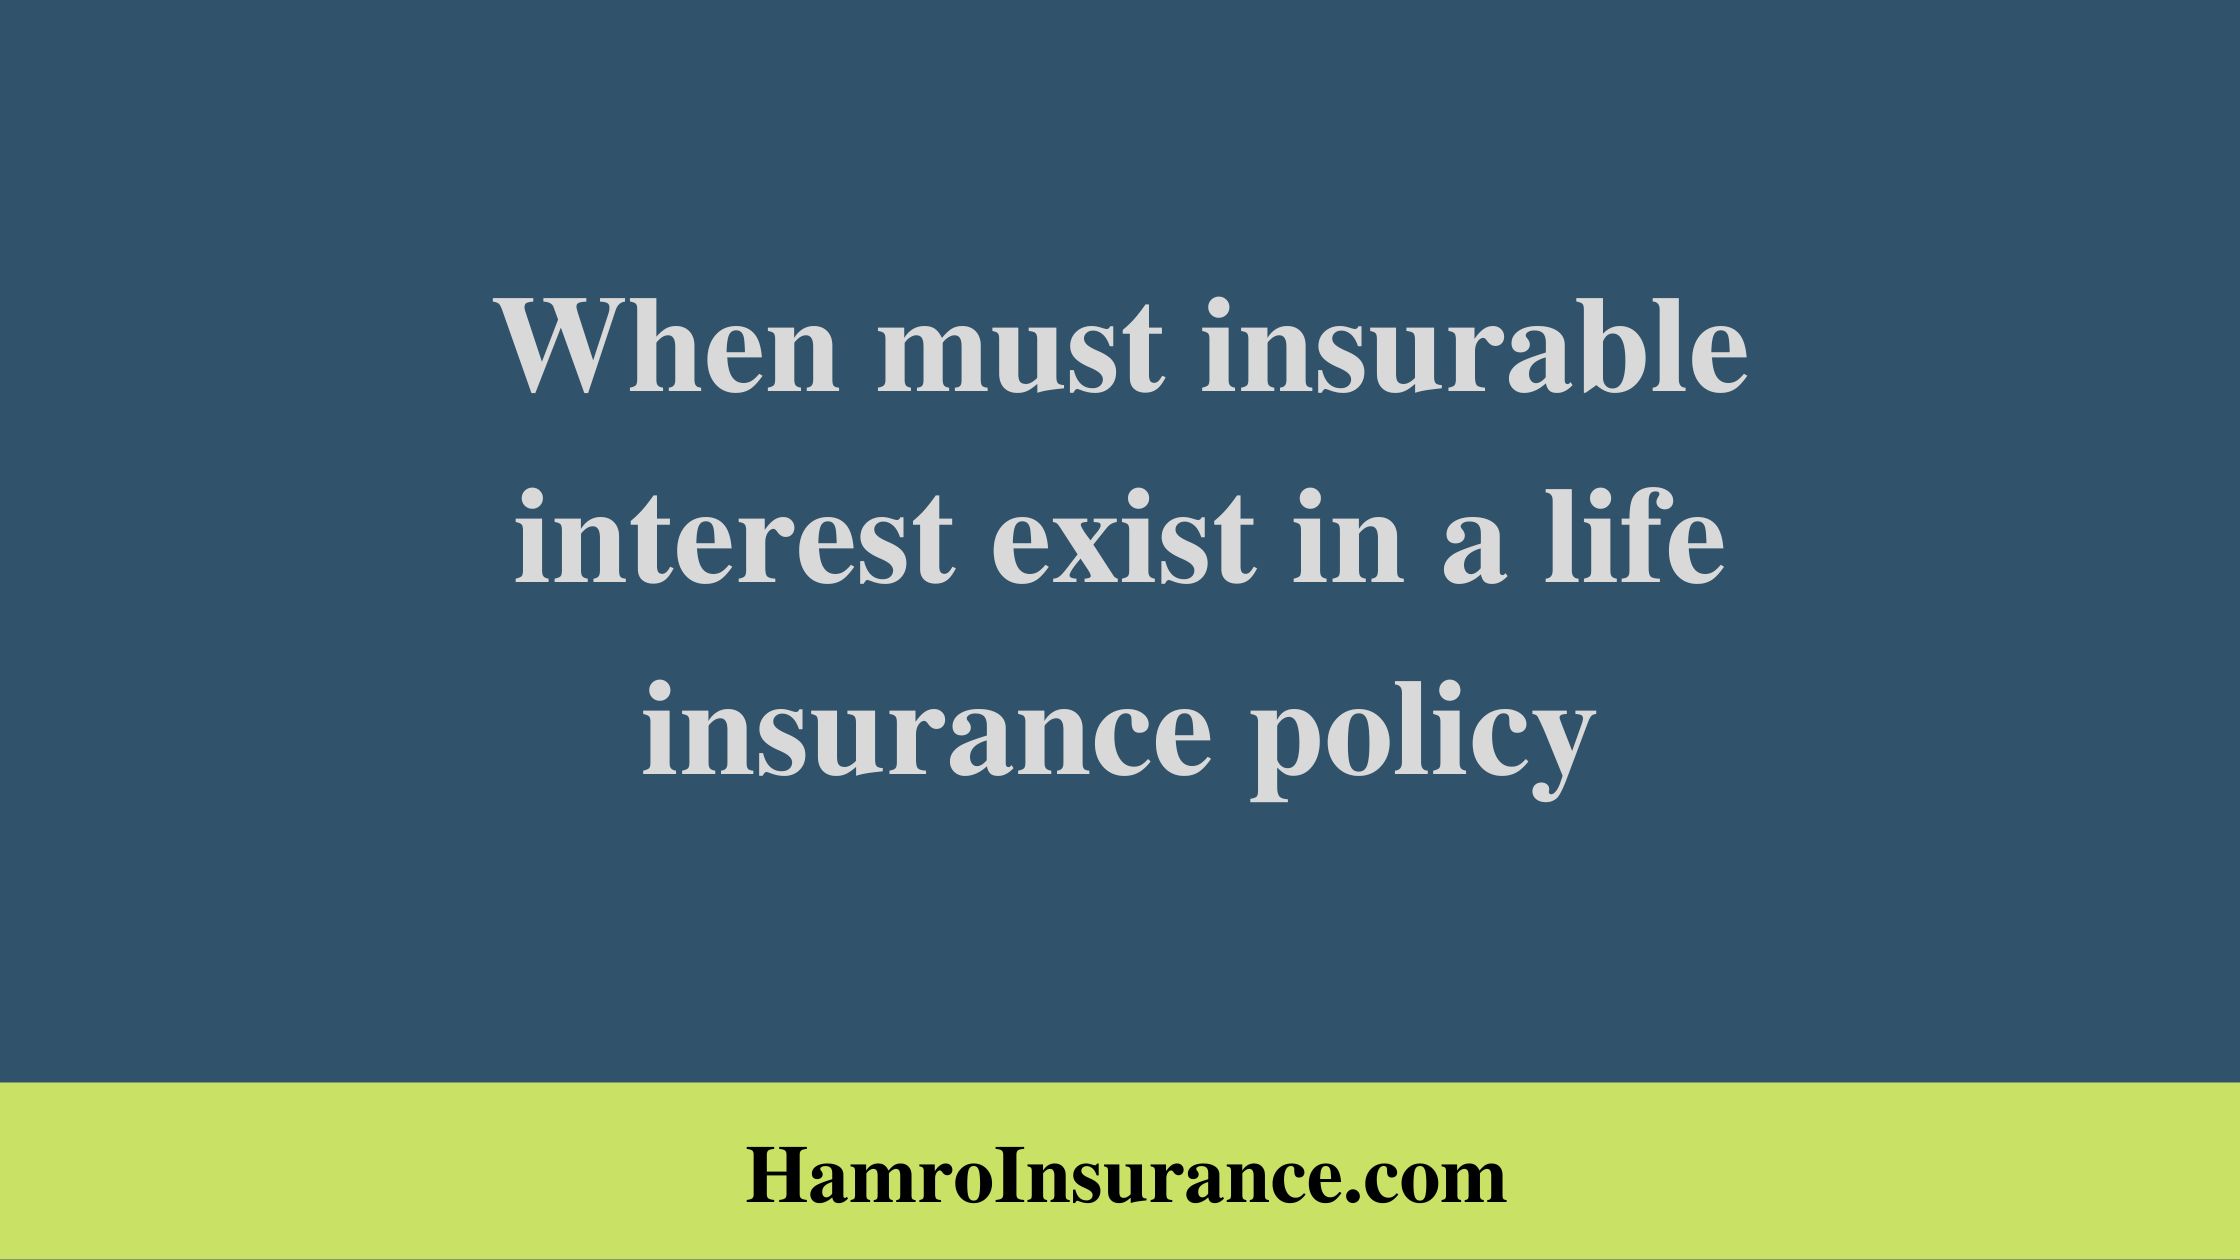 When must insurable interest exist in a life insurance policy